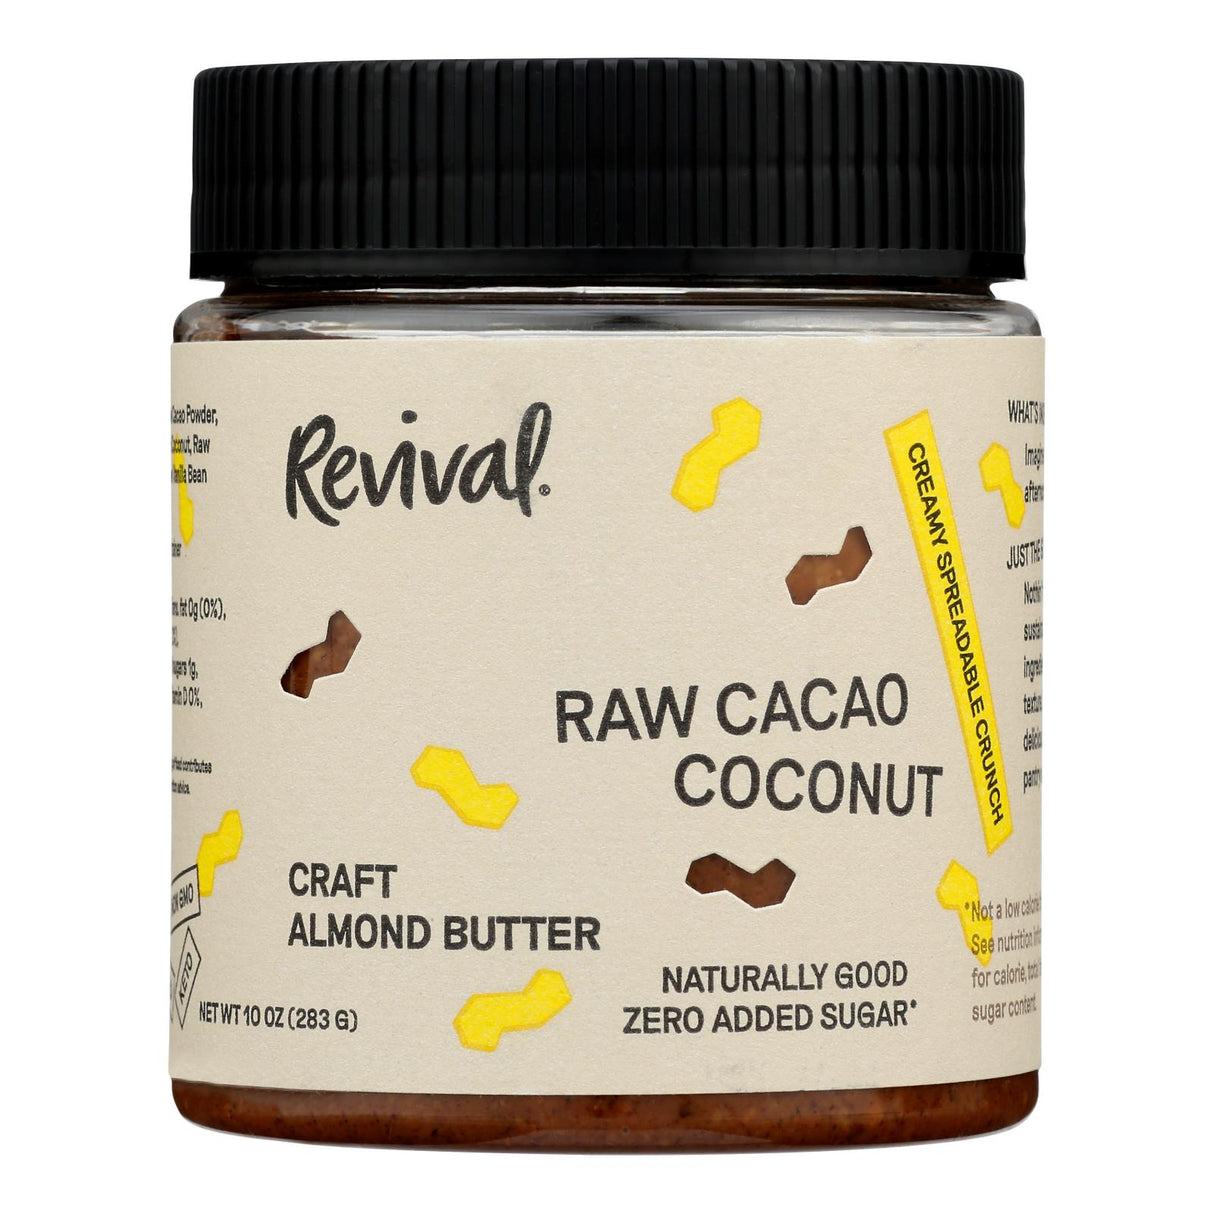 Revival Raw Cacao Coconut Almond Butter - 10 oz Jars (Pack of 6) - Cozy Farm 